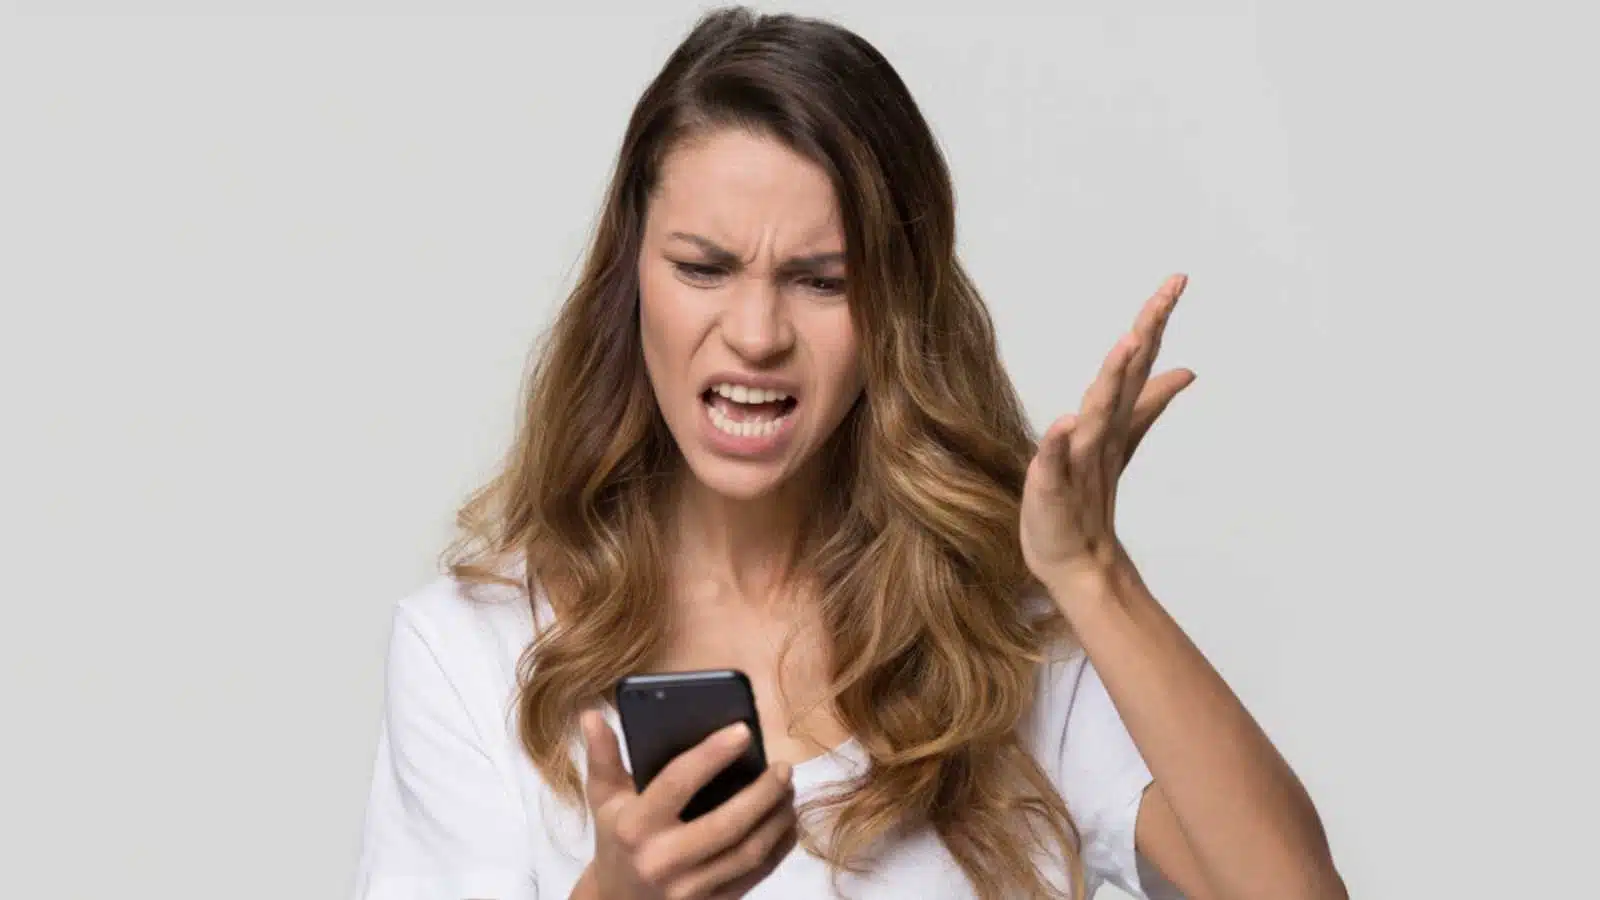 Annoyed woman with mobile